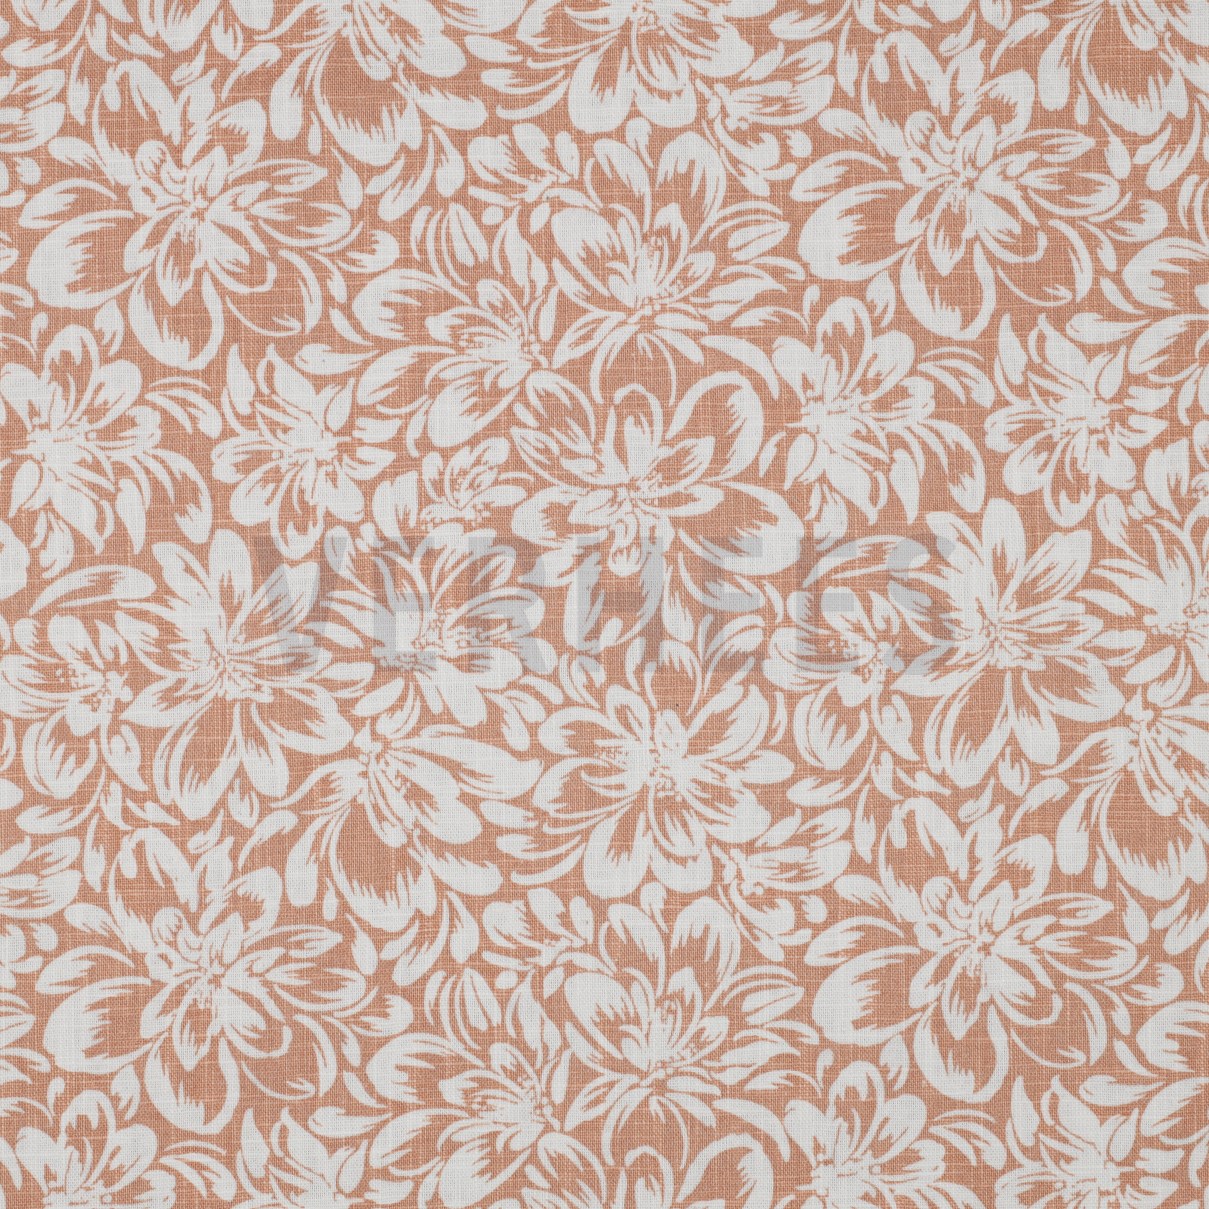 LINEN WASHED FLOWERS LIGHT APRICOT (high resolution)